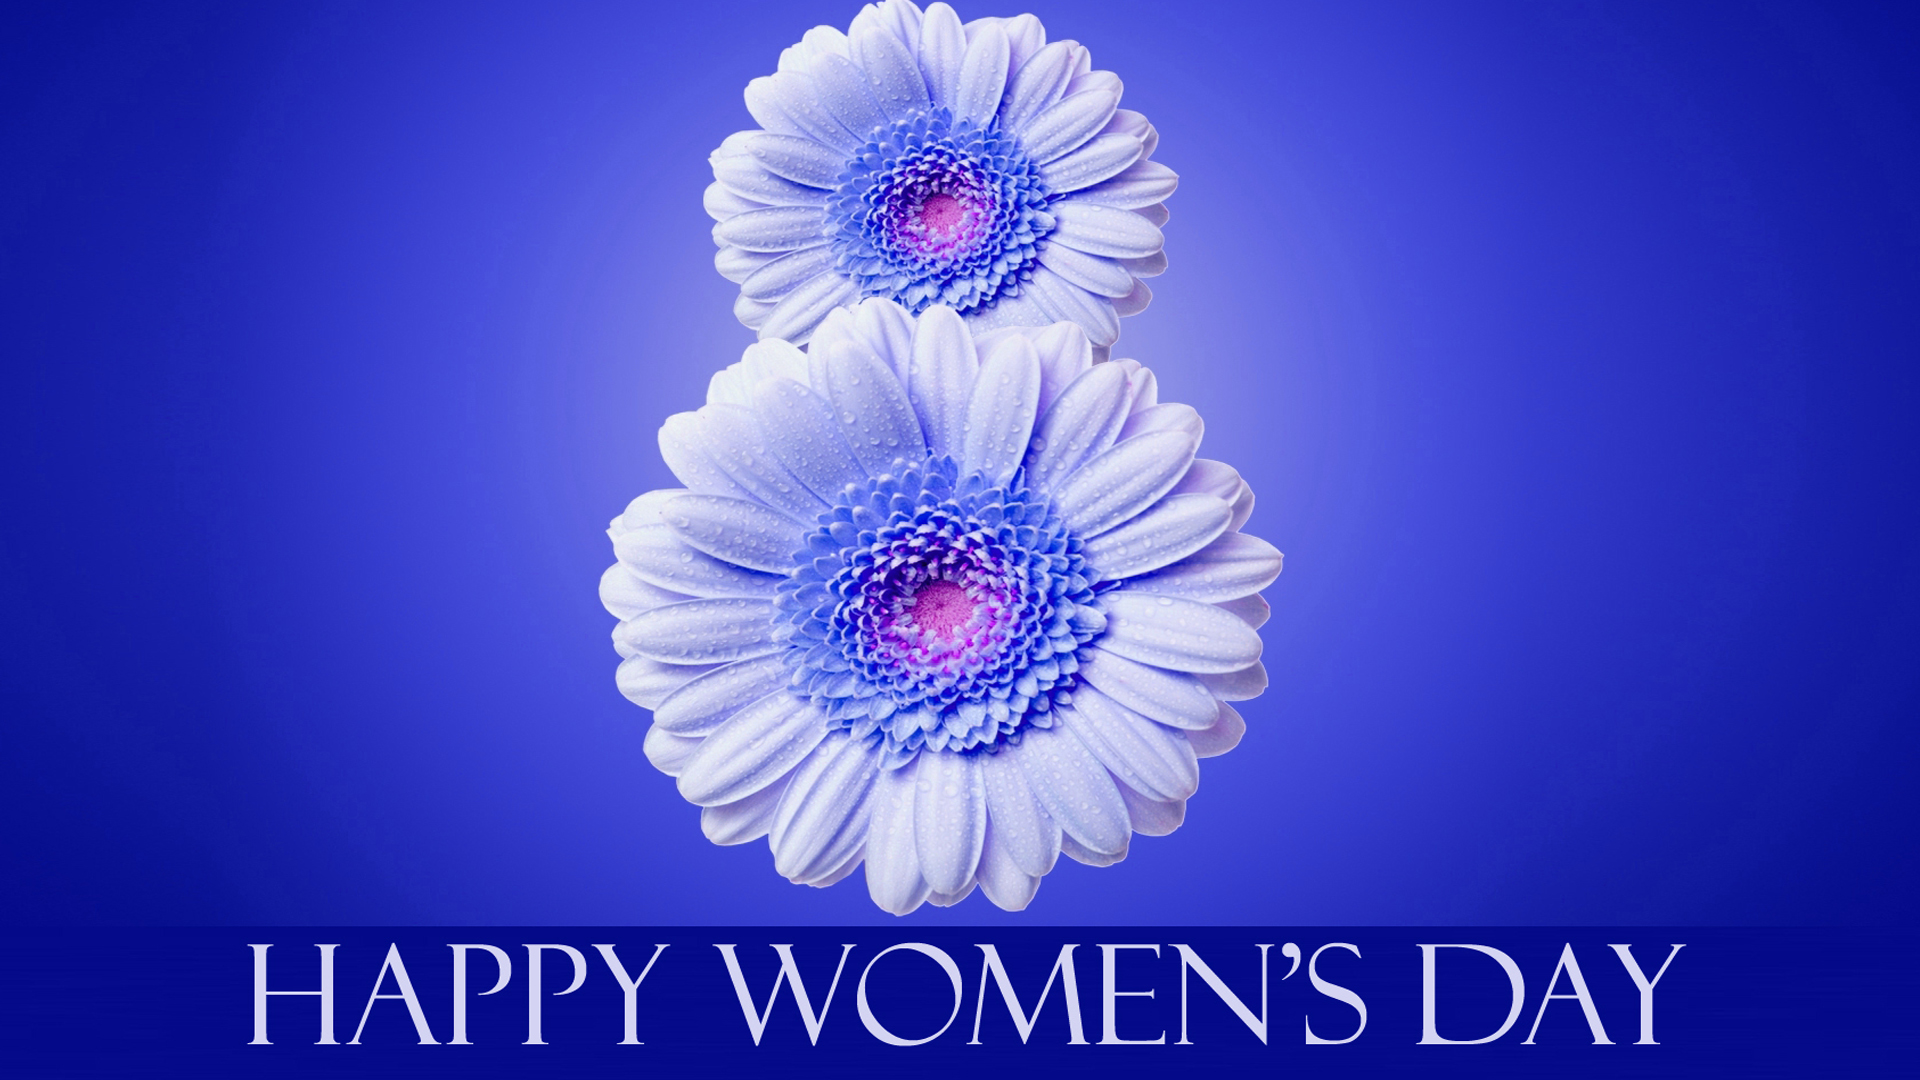 happy womens day image 2018